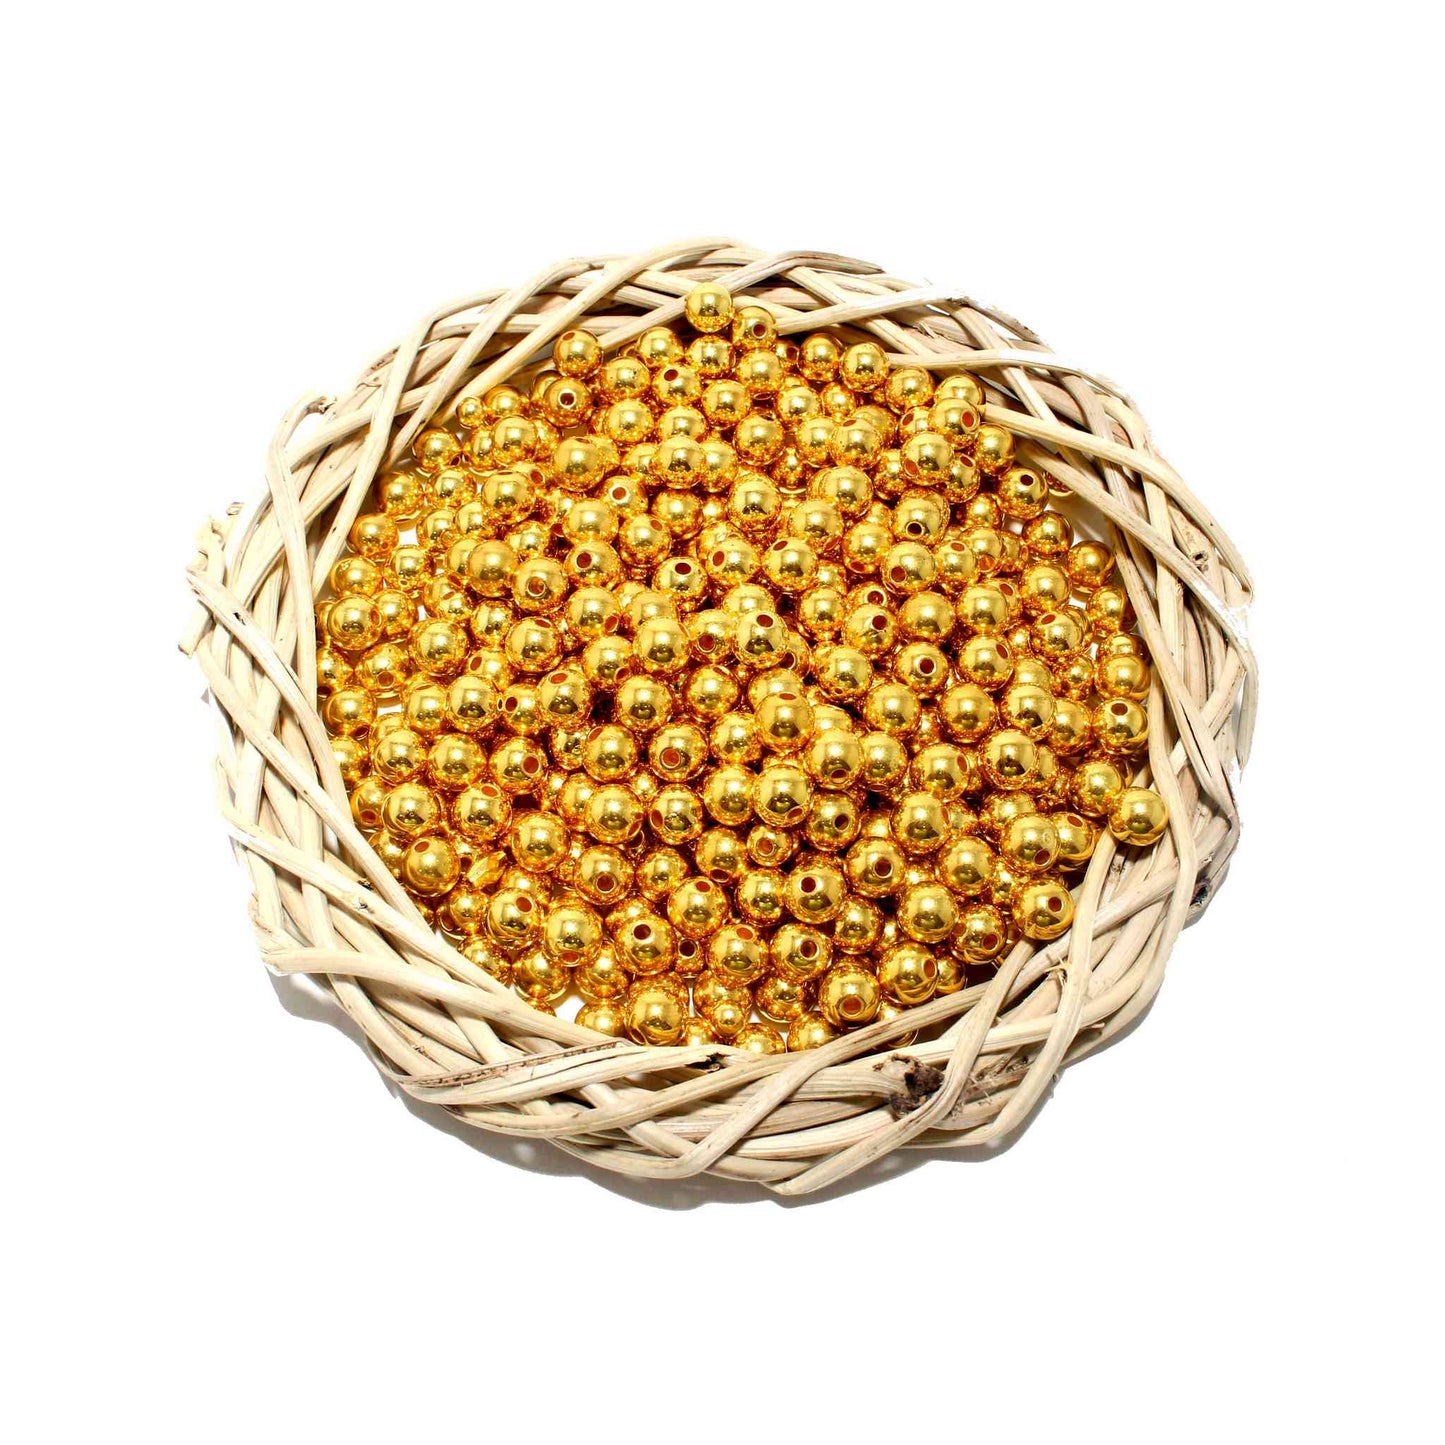 Indian Petals Premium quality Ball Beads for DIY Craft, Trousseau Packing or Decoration - Design 629, Size - 6mm - Indian Petals